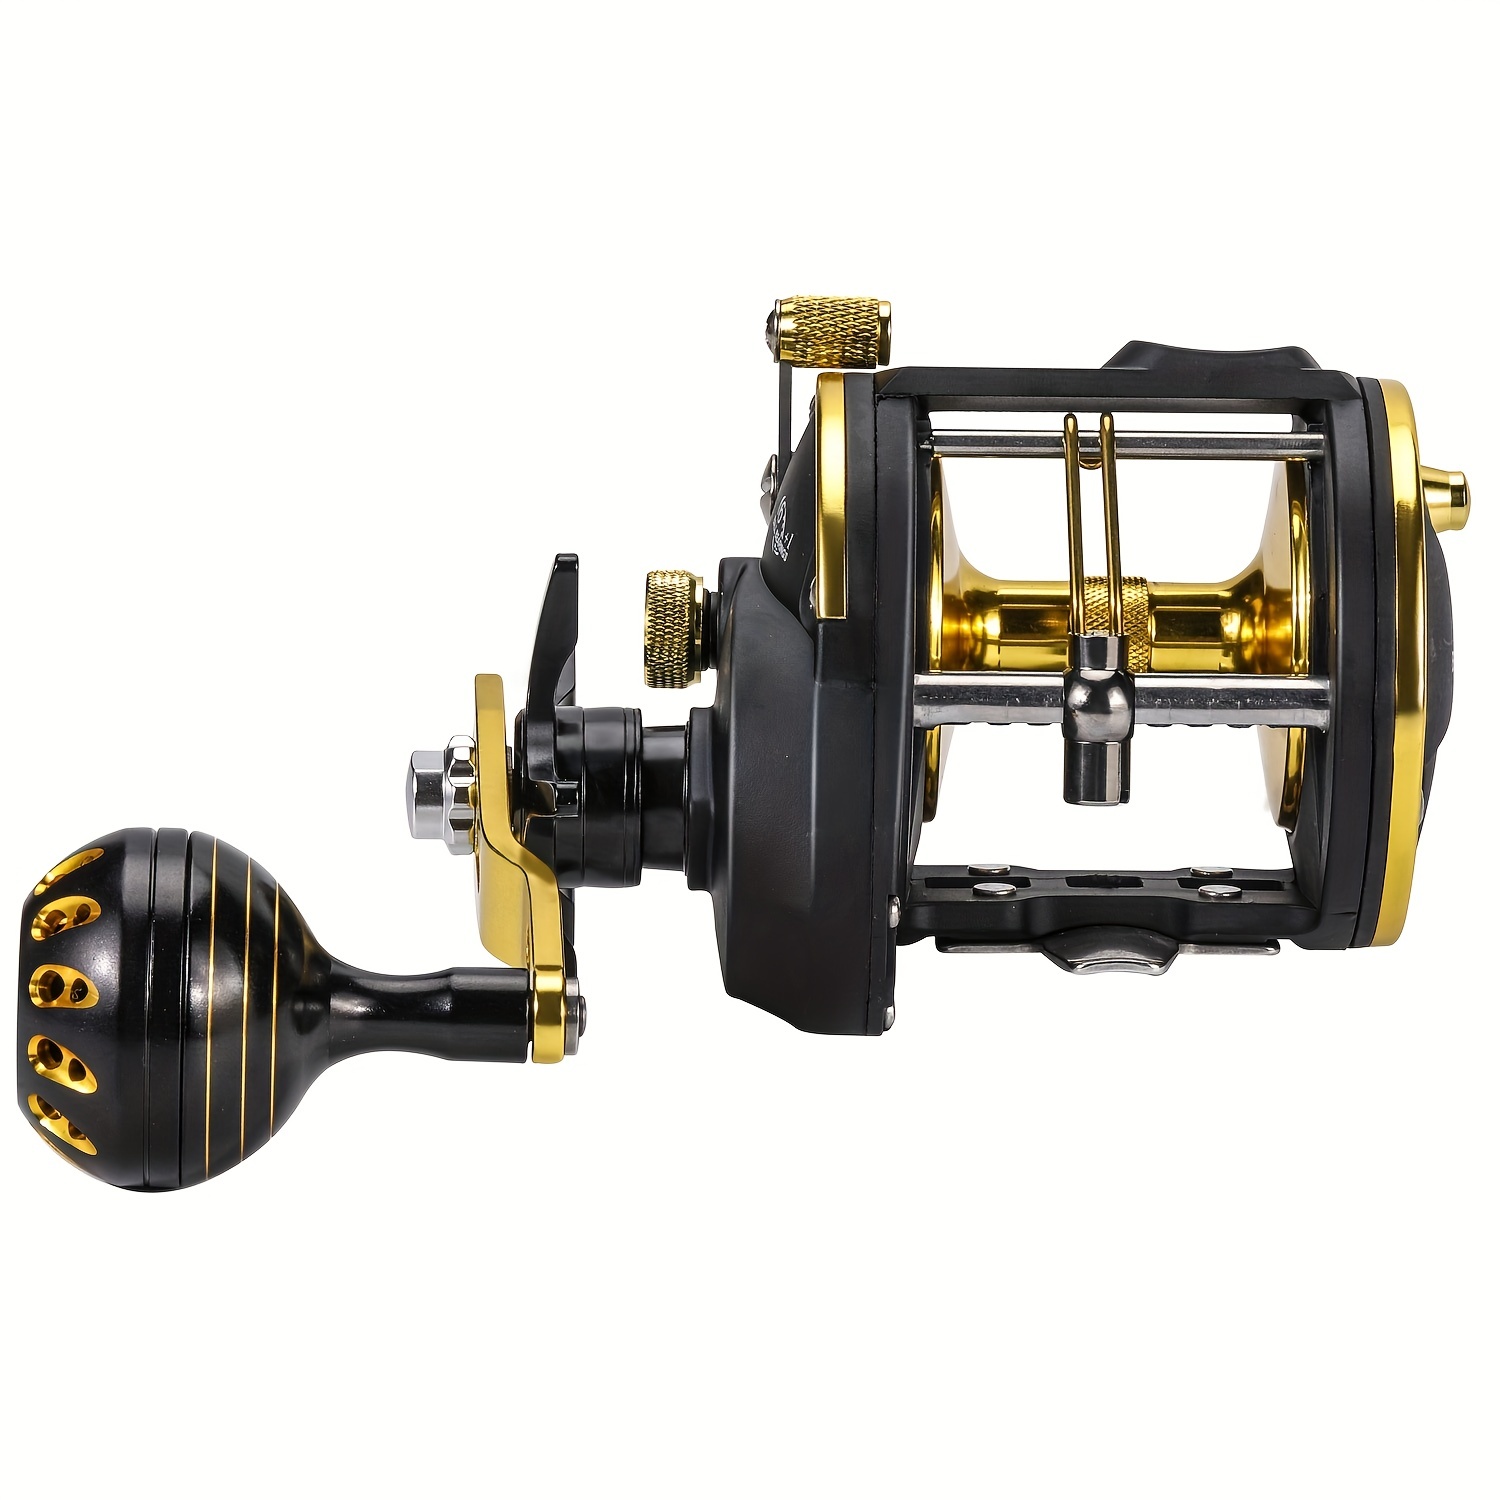 Slow Pitch Jigging Reel Saltwater BalanZze Gear Ratio 6.3:1 Offshore  13BB2RB Left and Right Hand Trolling Reels Conventional Jigging Reels